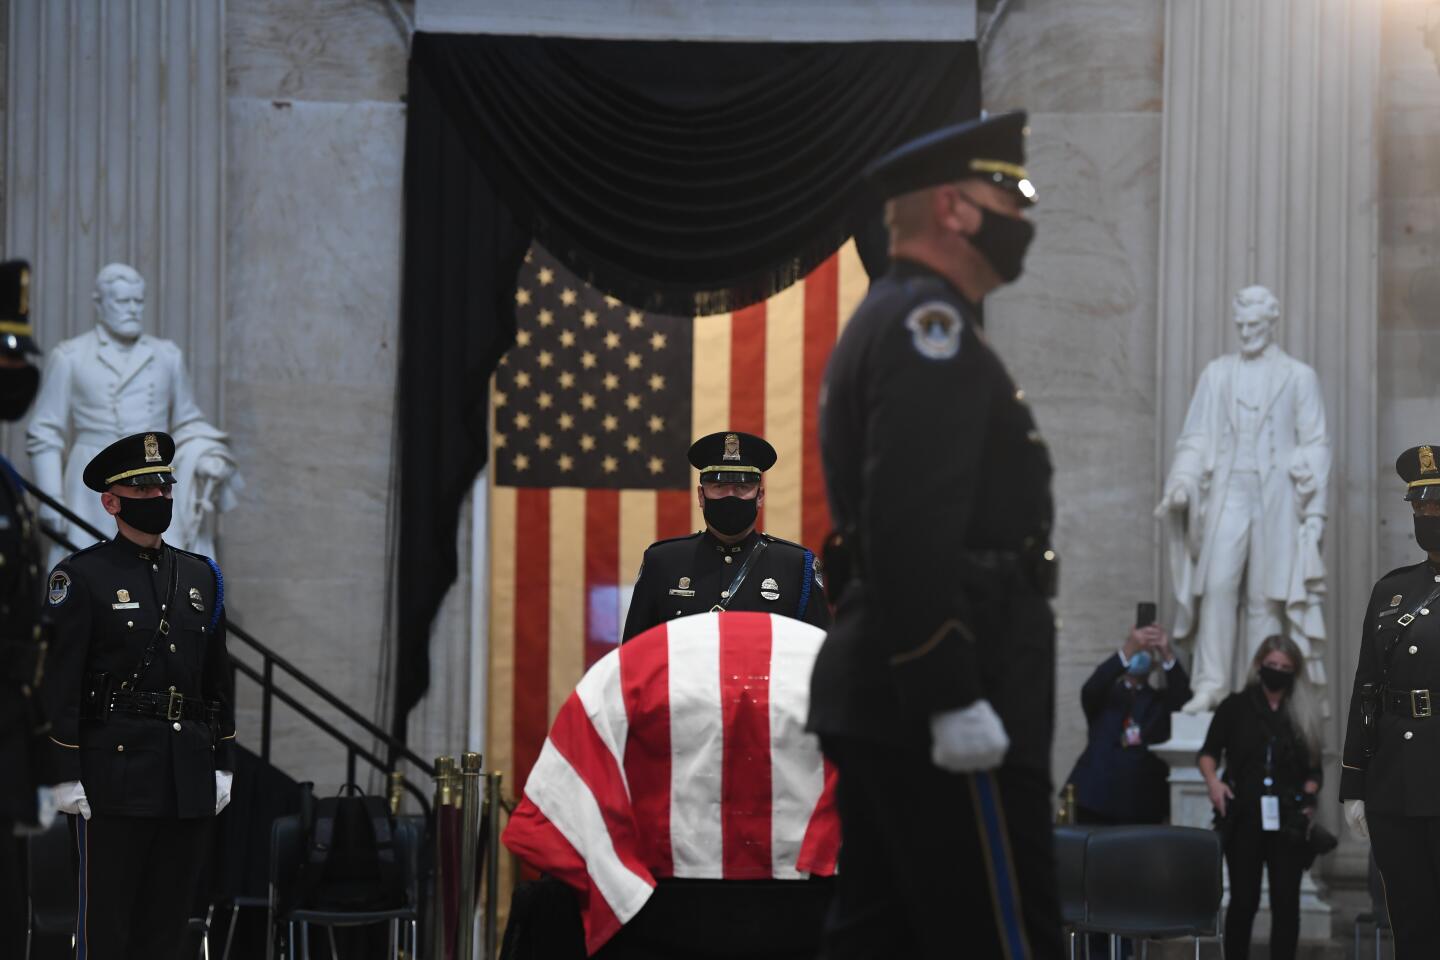 Members of the U.S. Capitol Police honor guard stand near the flag-draped casket of Rep. John Lewis, D-Ga., on Monday in the Rotunda of the U.S. Capitol in Washington.